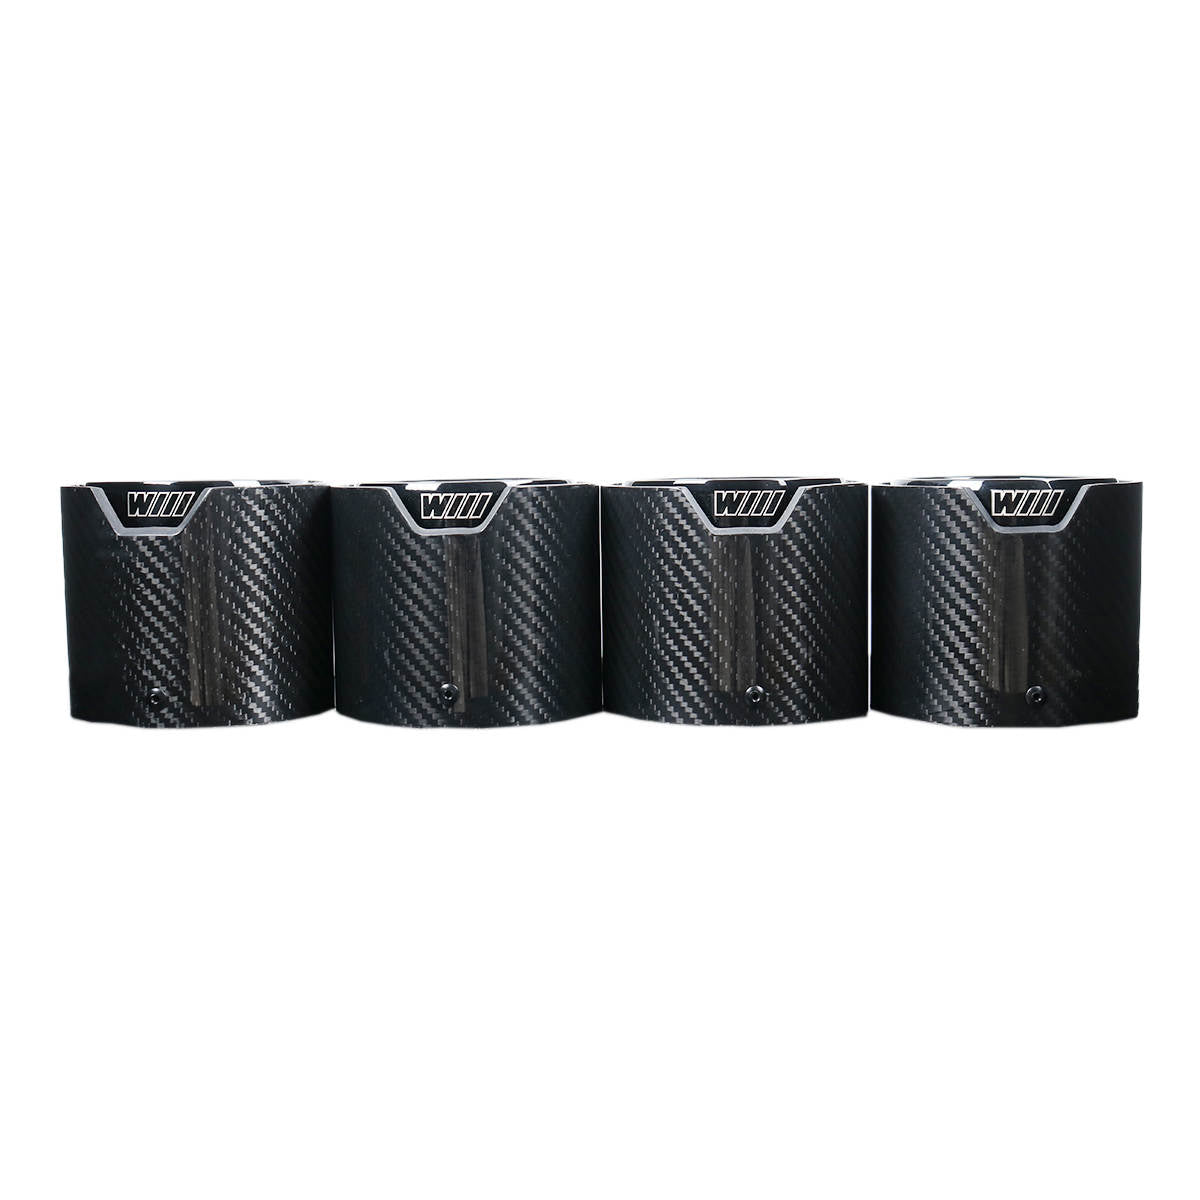 Introducing the ultimate finishing touch for your BMW: the Twenty Two Tuning Black BMW M Performance G8X Carbon Fiber Exhaust Tips. These sleek and stylish tips are designed to enhance the character of your BMW, exuding motorsport enthusiasm with their carbon fiber construction. The glossy carbon outer shell is contoured to reveal an engraved "M" logo, while the inner tip is perforated for added design flair.